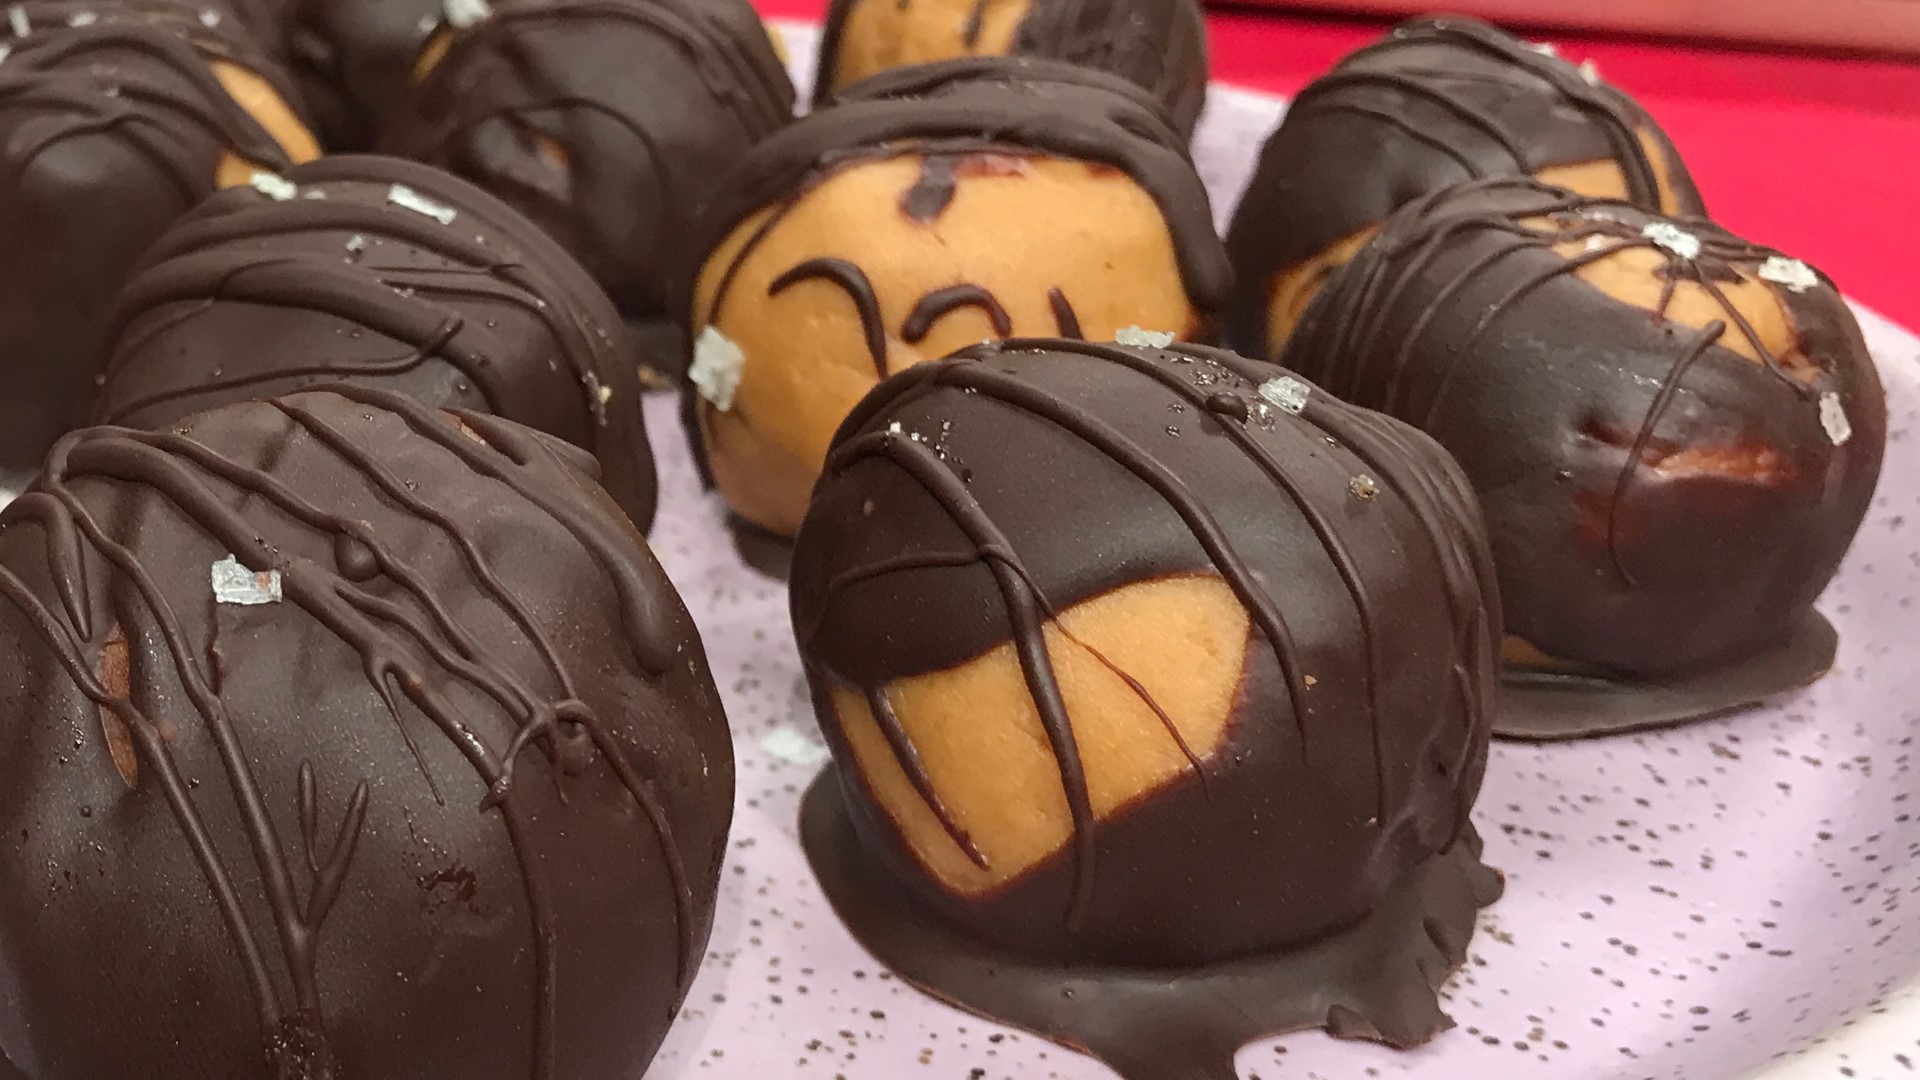 Nutrition coach, Lauren Chambers, shares her 'Salted Dark Chocolate Peanut Butter Balls' and to satisfy your sweet tooth without the guilt.